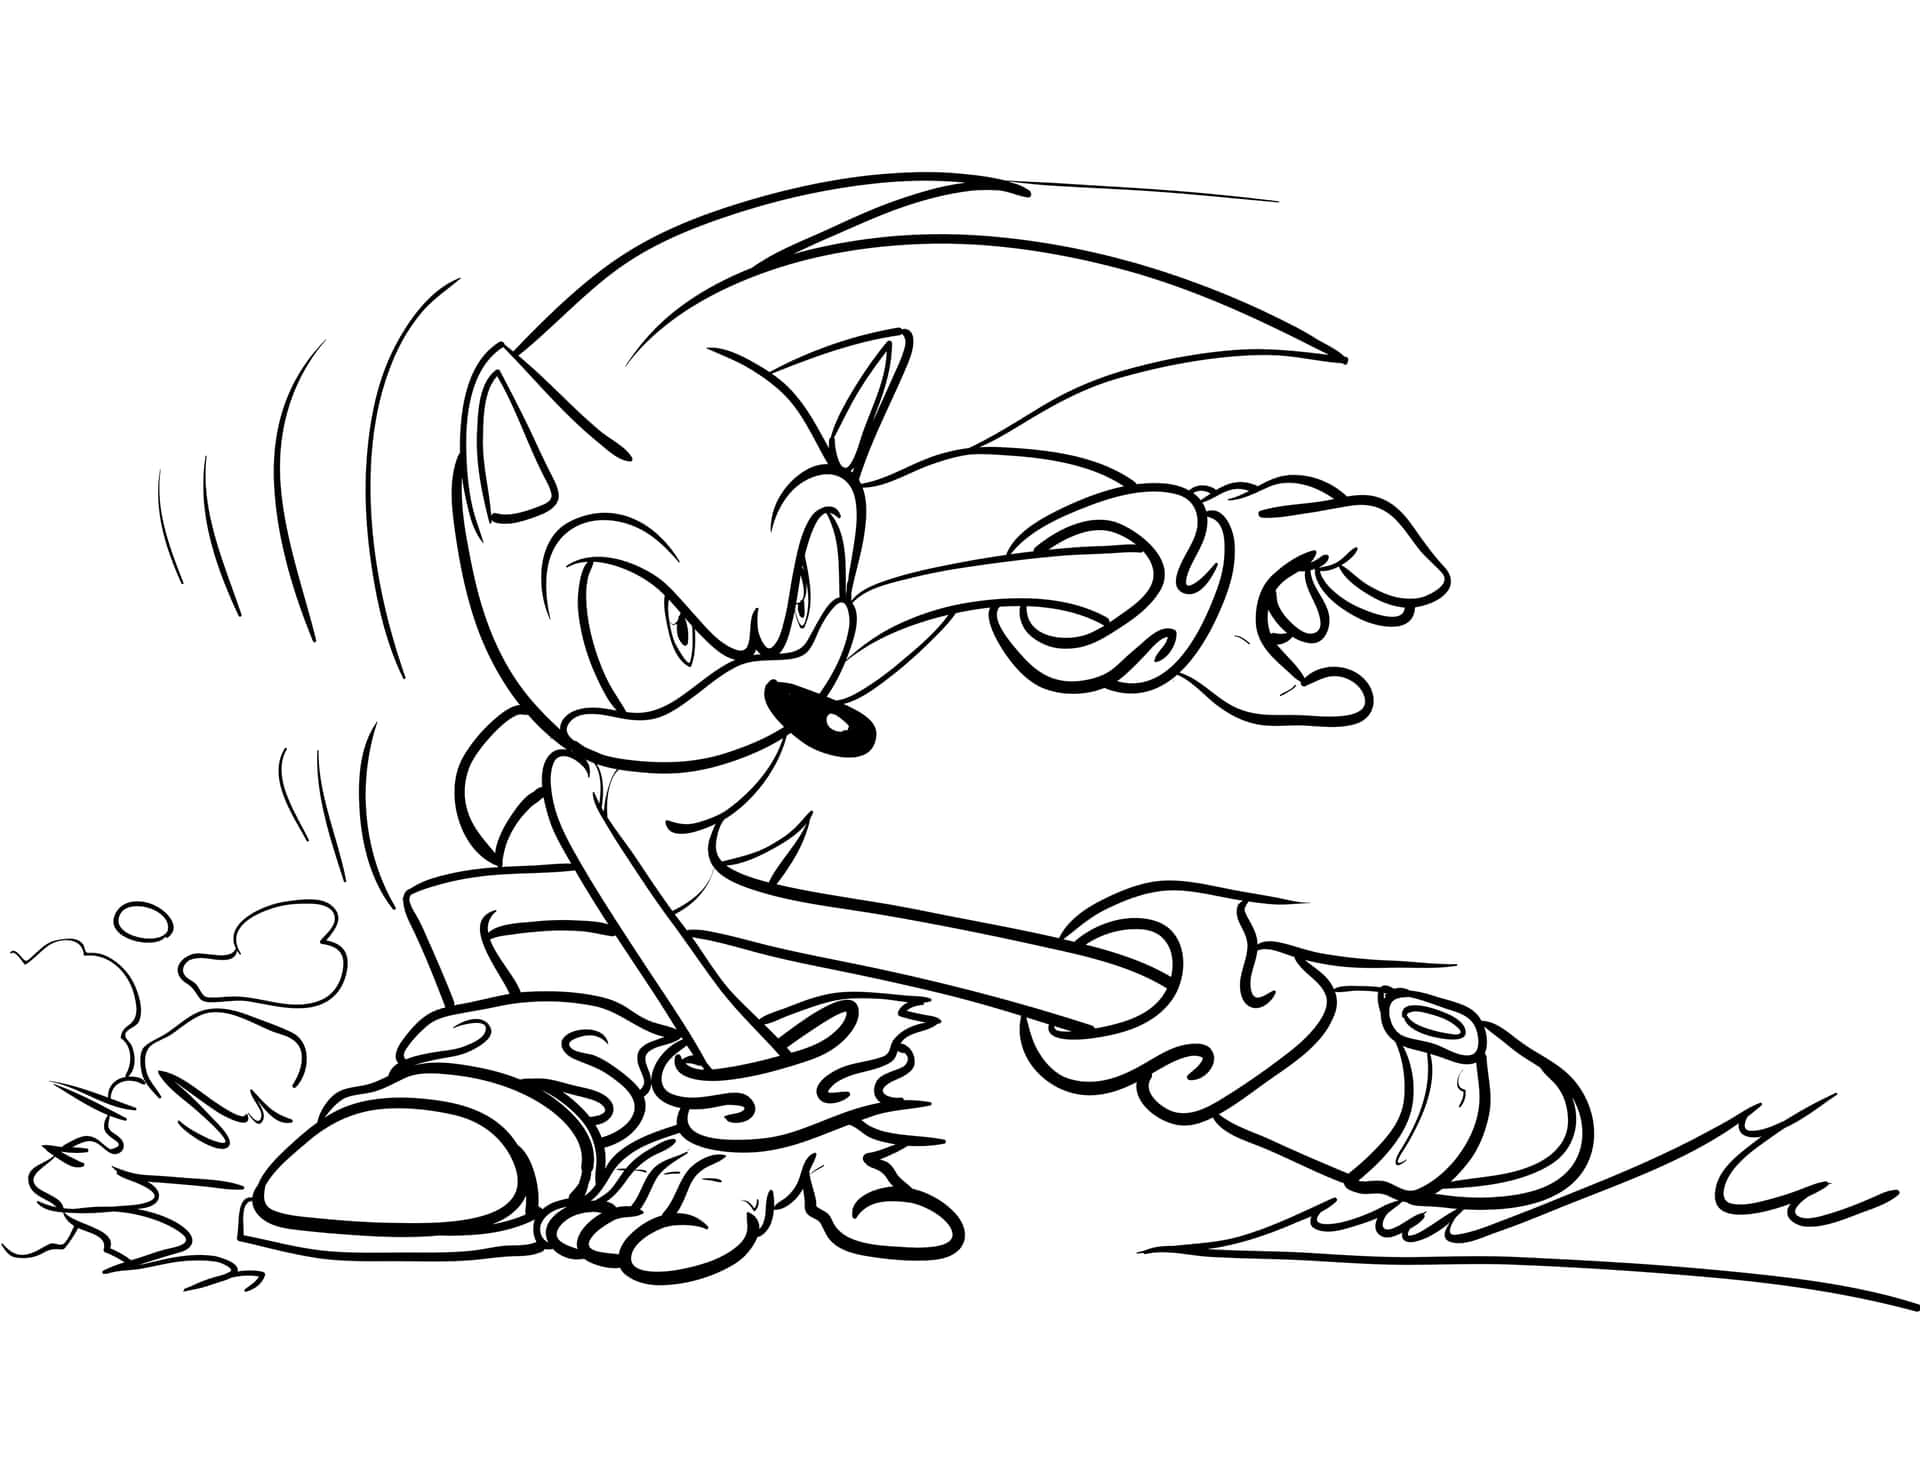 Intense Sonic The Hedgehog Action in Full Color